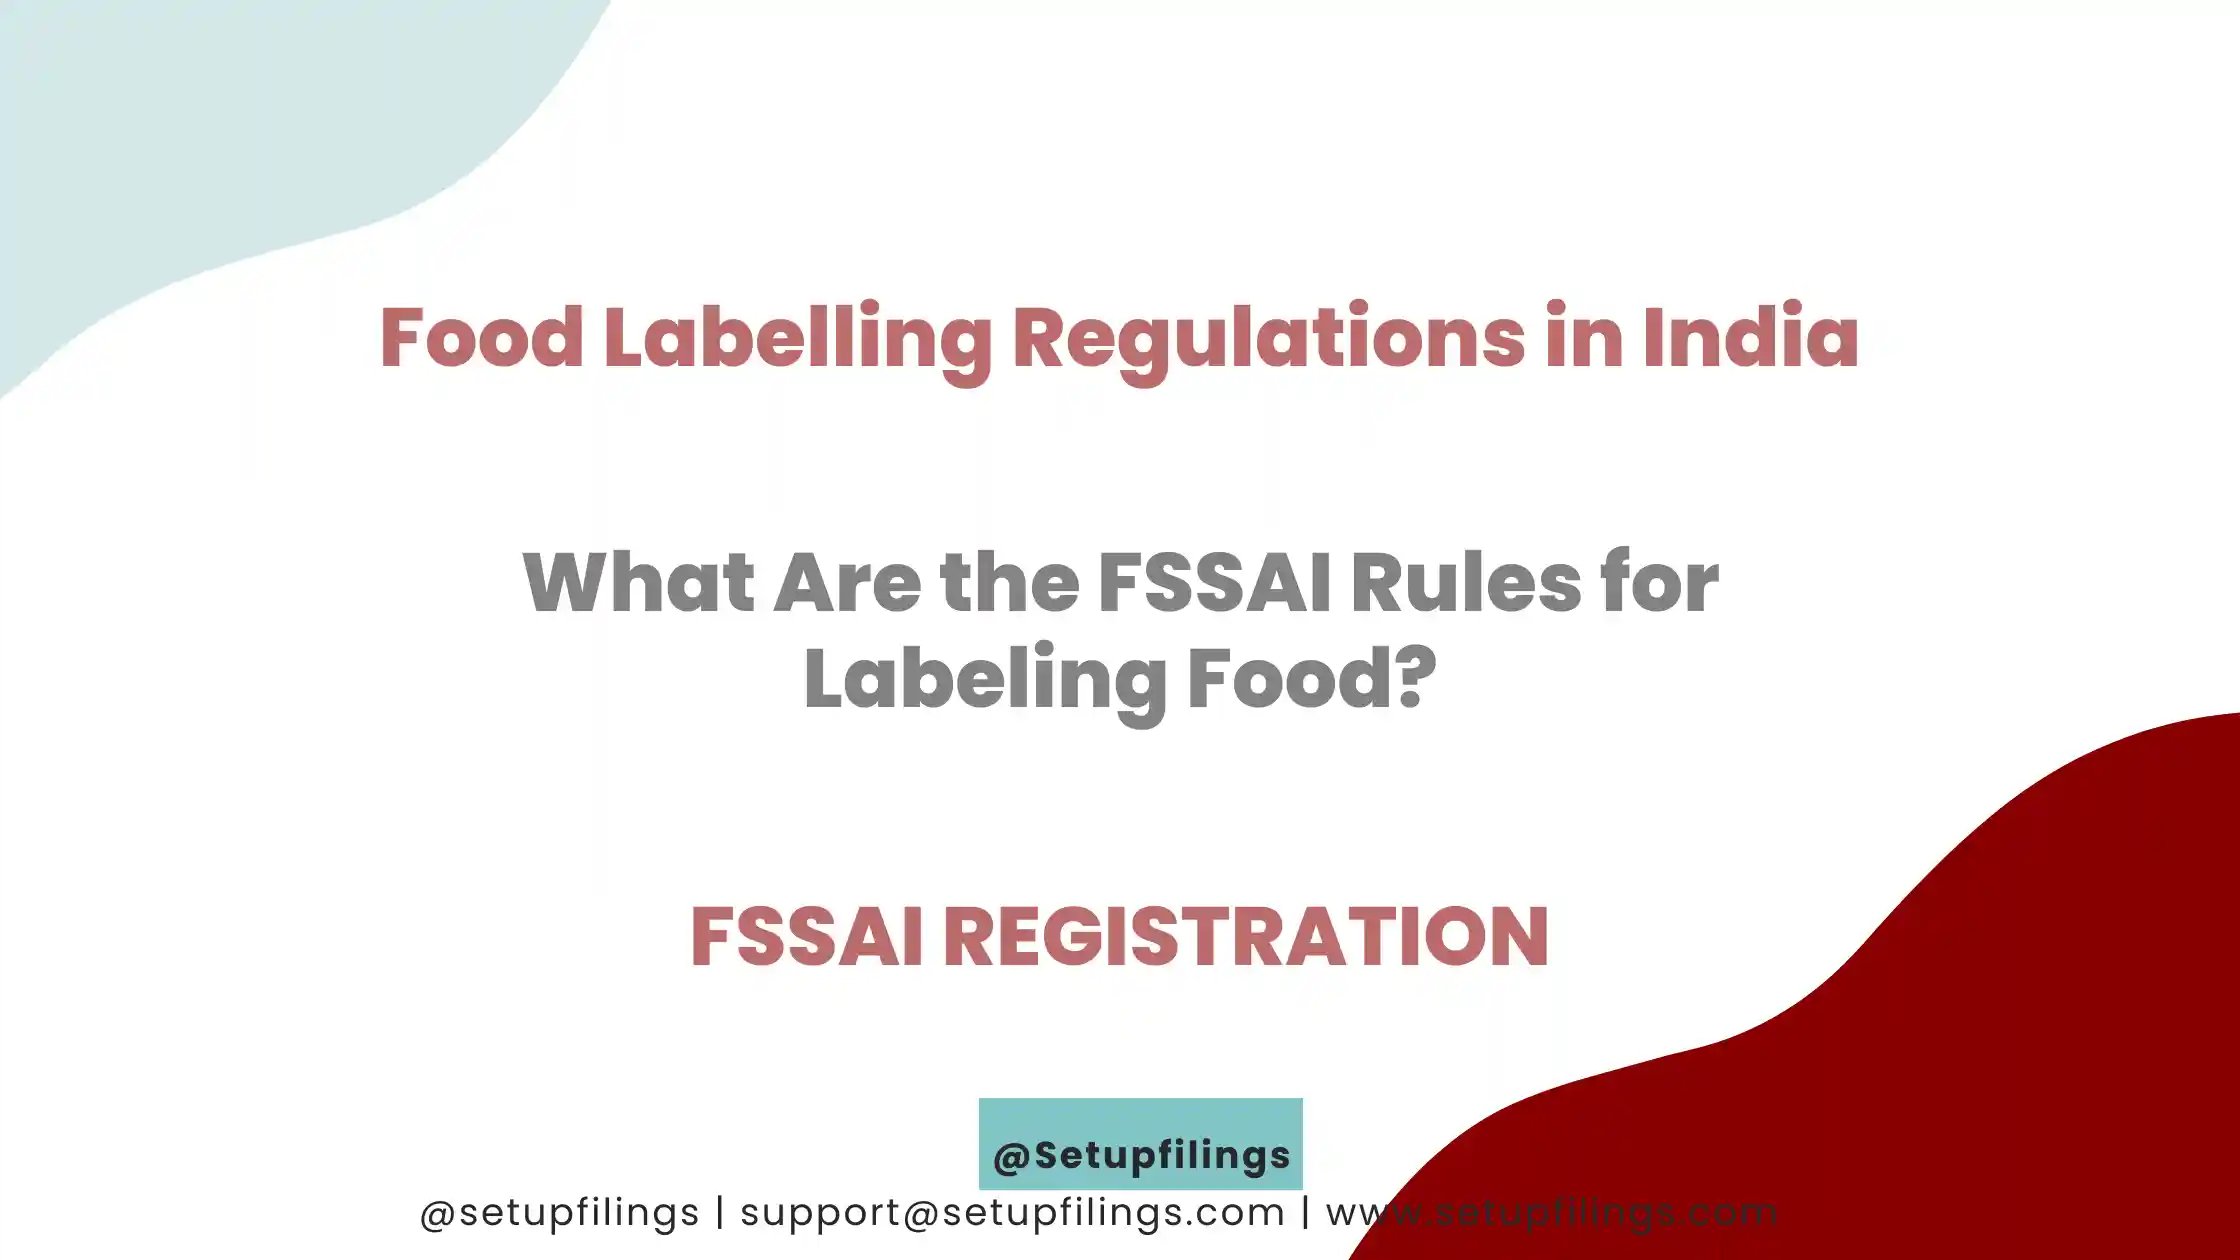 Food Labelling Regulations in India